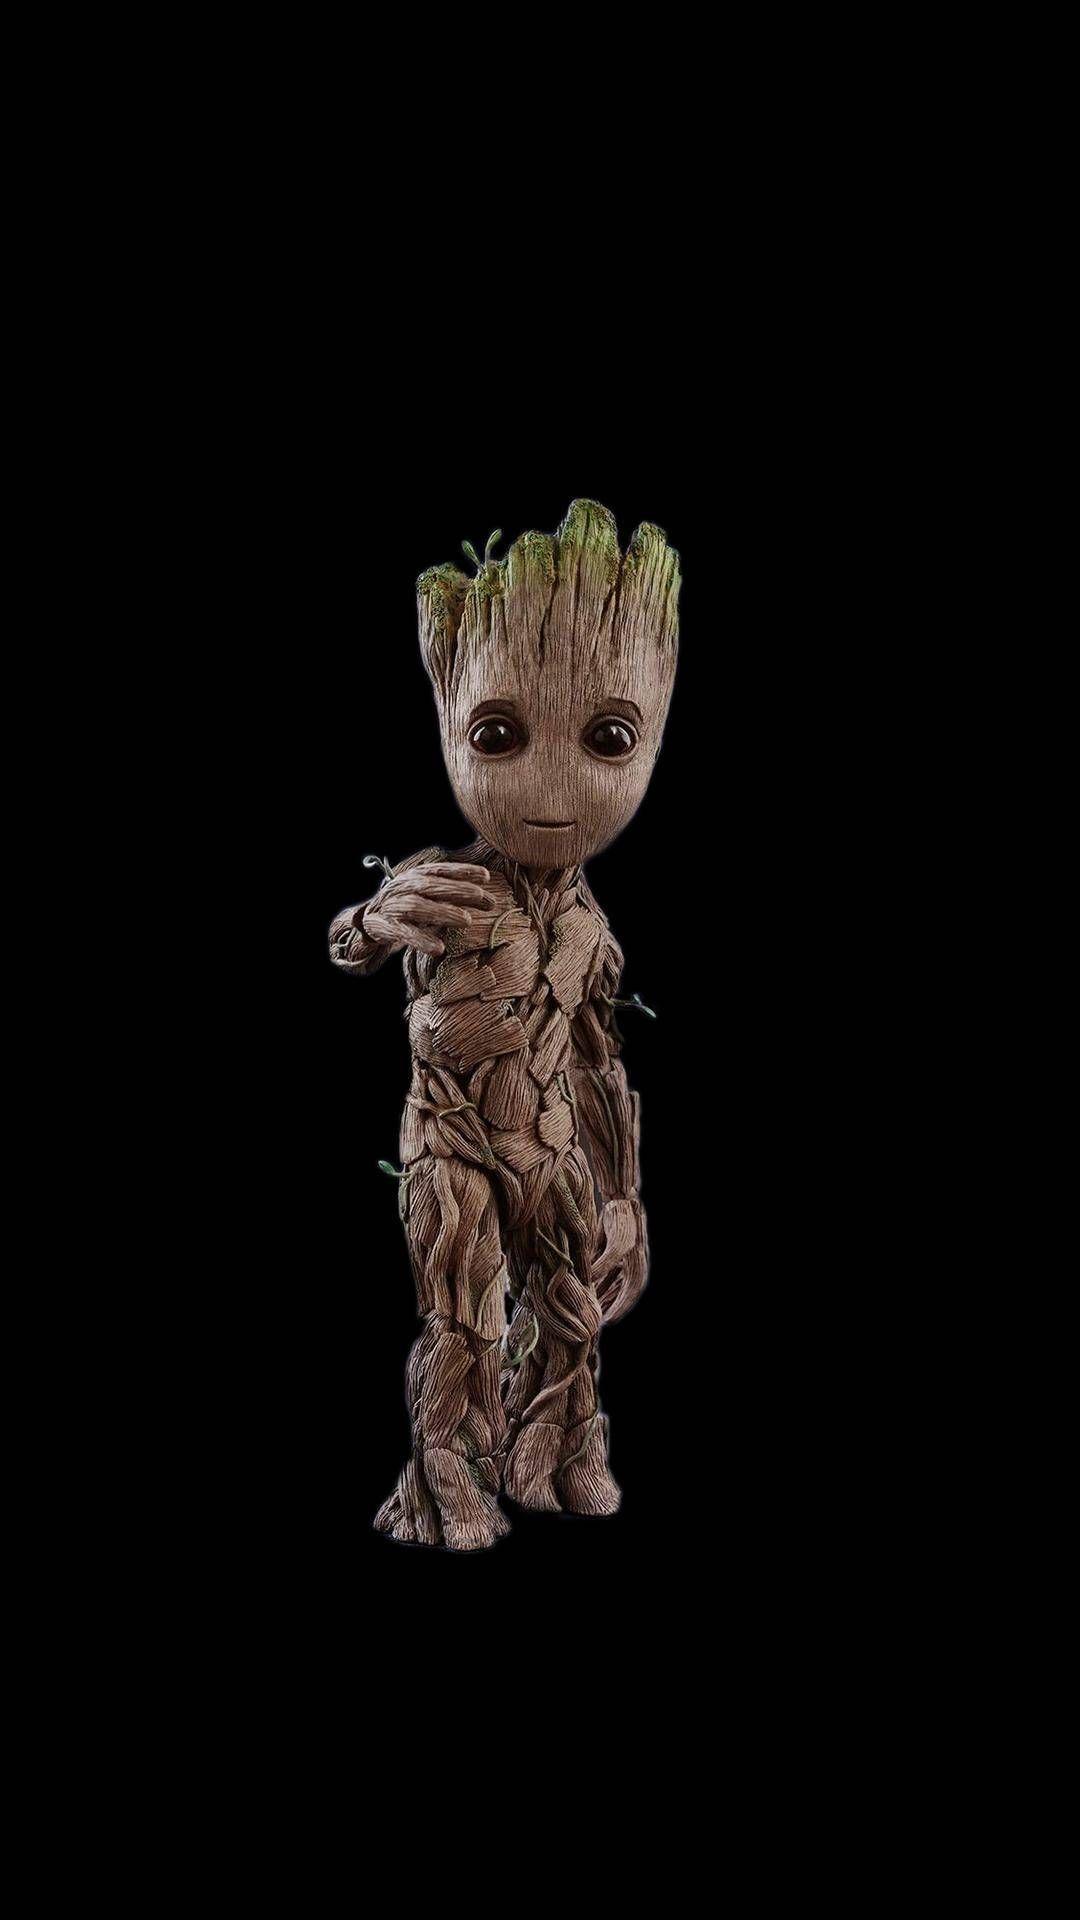 Baby Groot 4k 2019 HD Superheroes 4k Wallpapers Images Backgrounds  Photos and Pictures